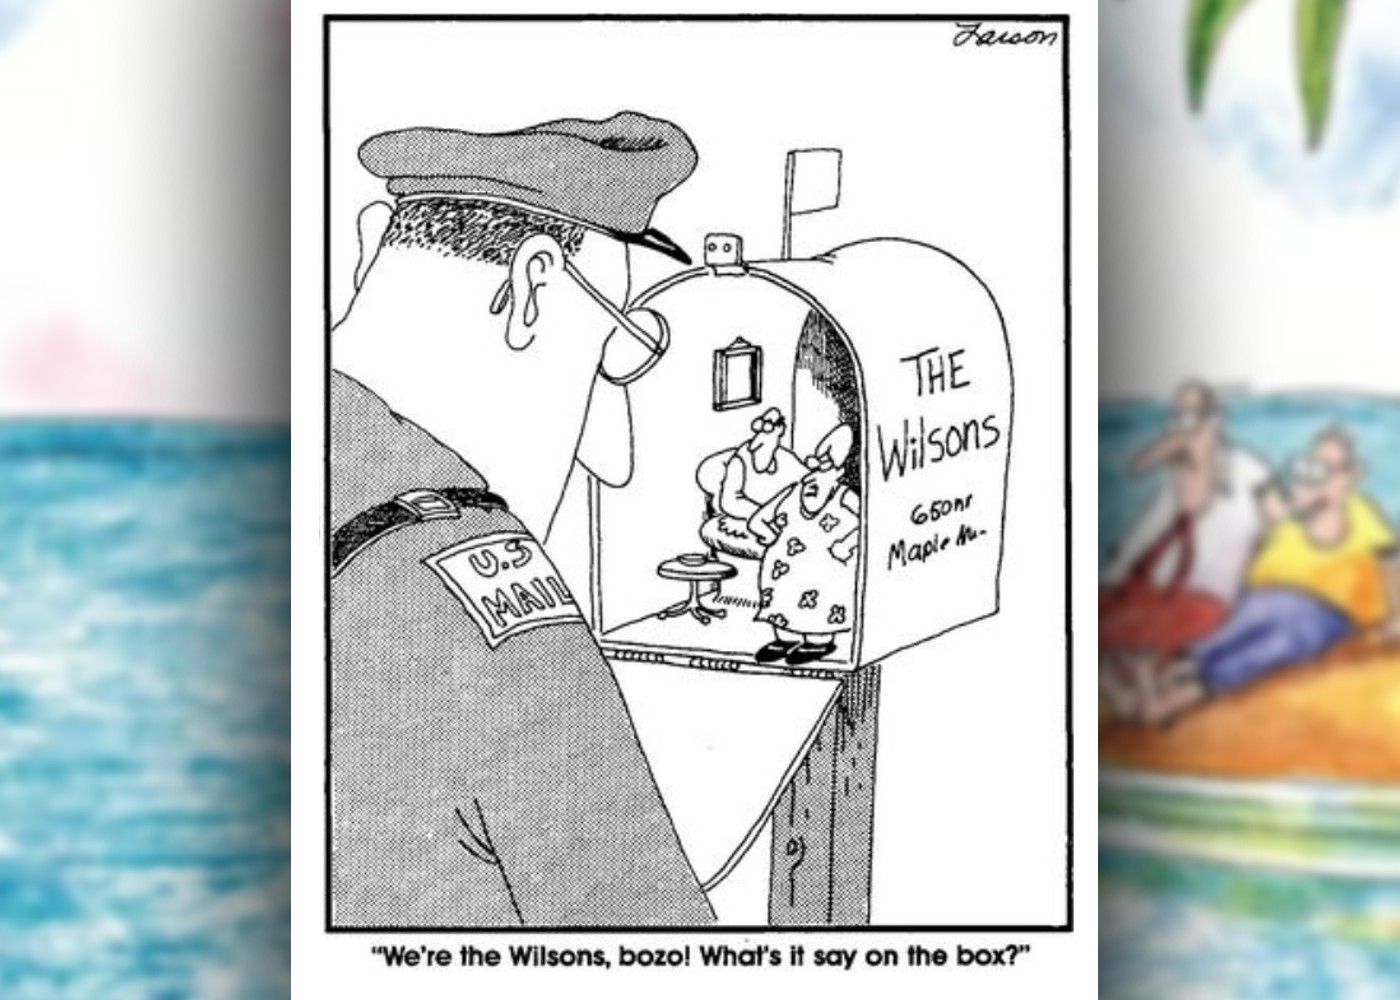 far side comic where a postman discovers tiny people living in a mailbox